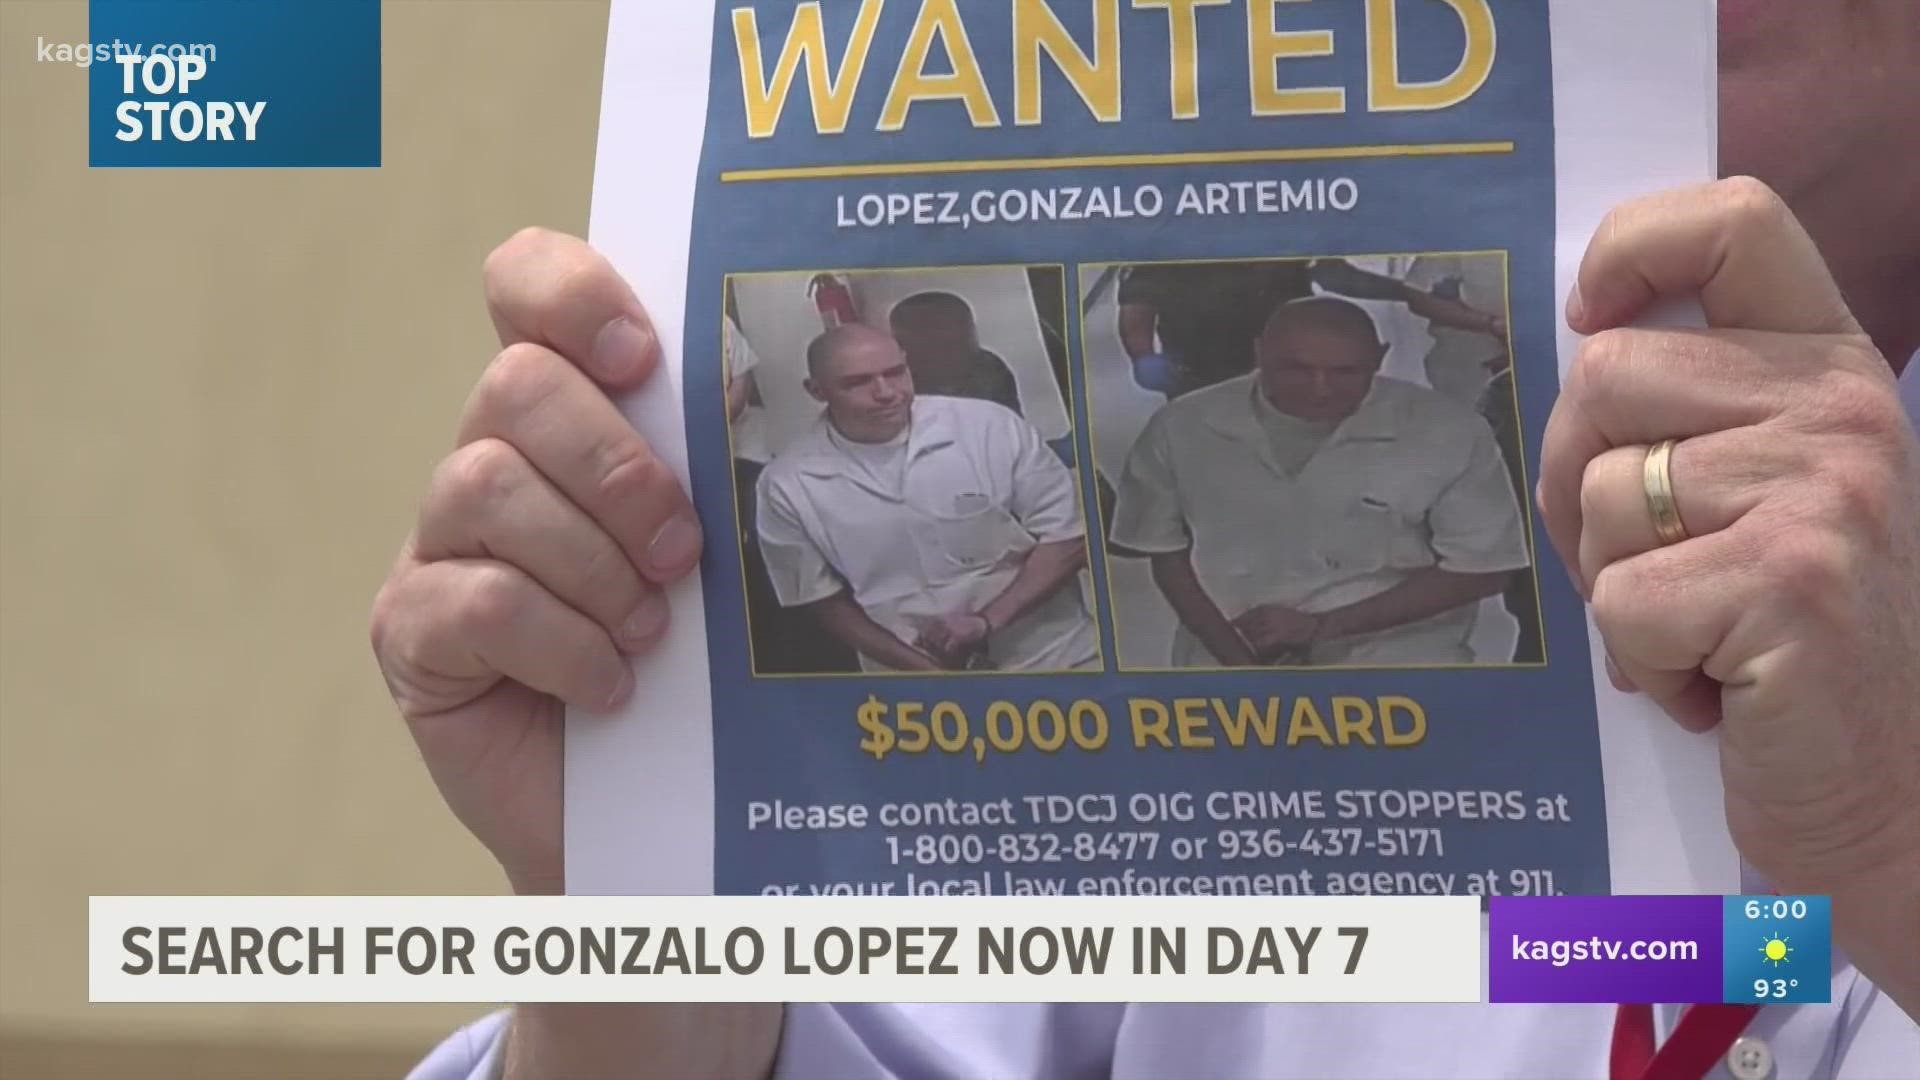 The search continues on for Gonzalo Lopez. The TDCJ said it won't slow down until he's caught.